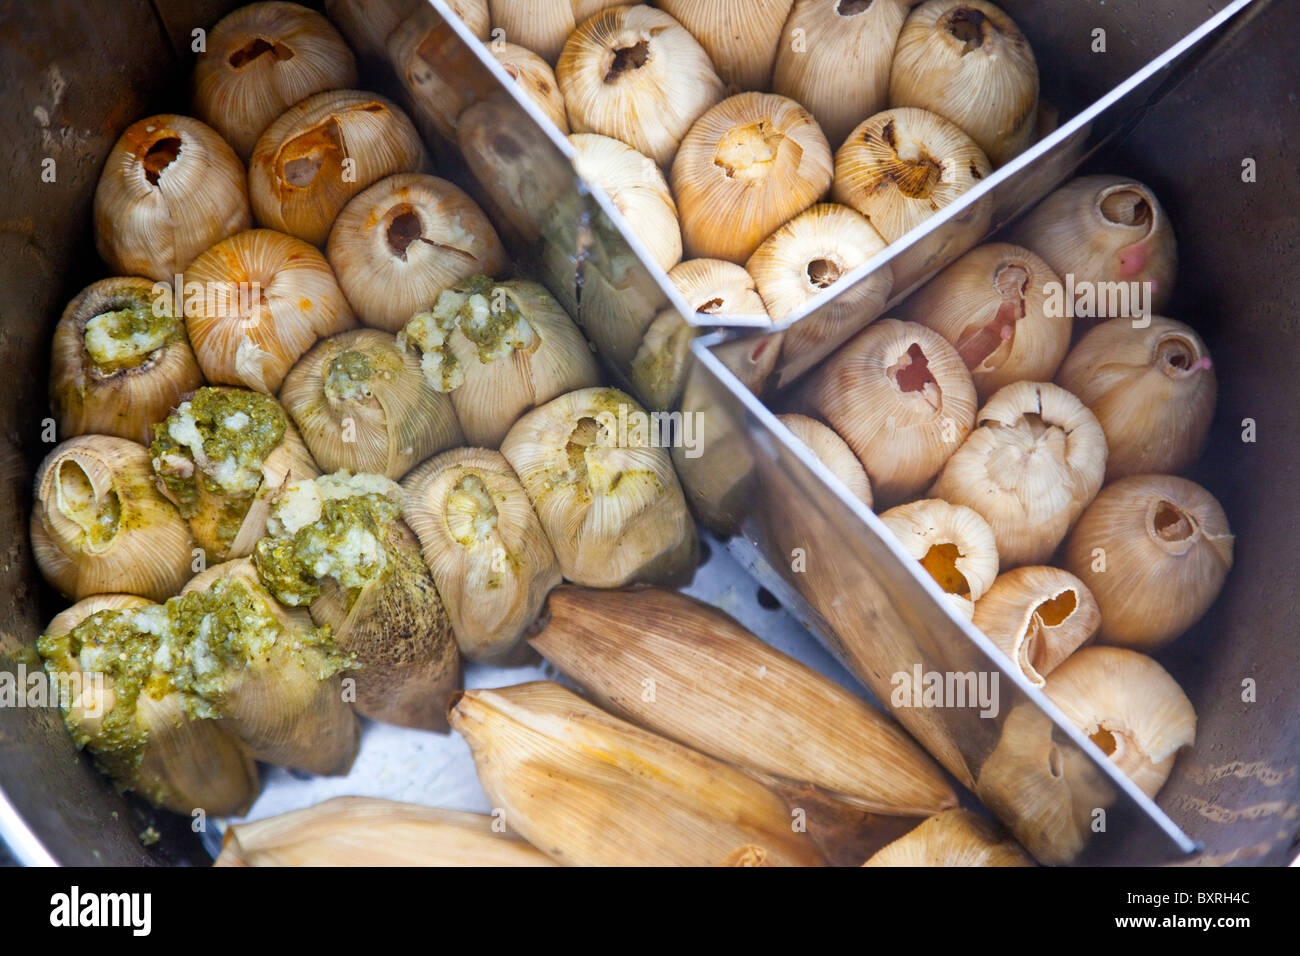 Tamales at a street vendor in Mexico City, Mexico Stock Photo